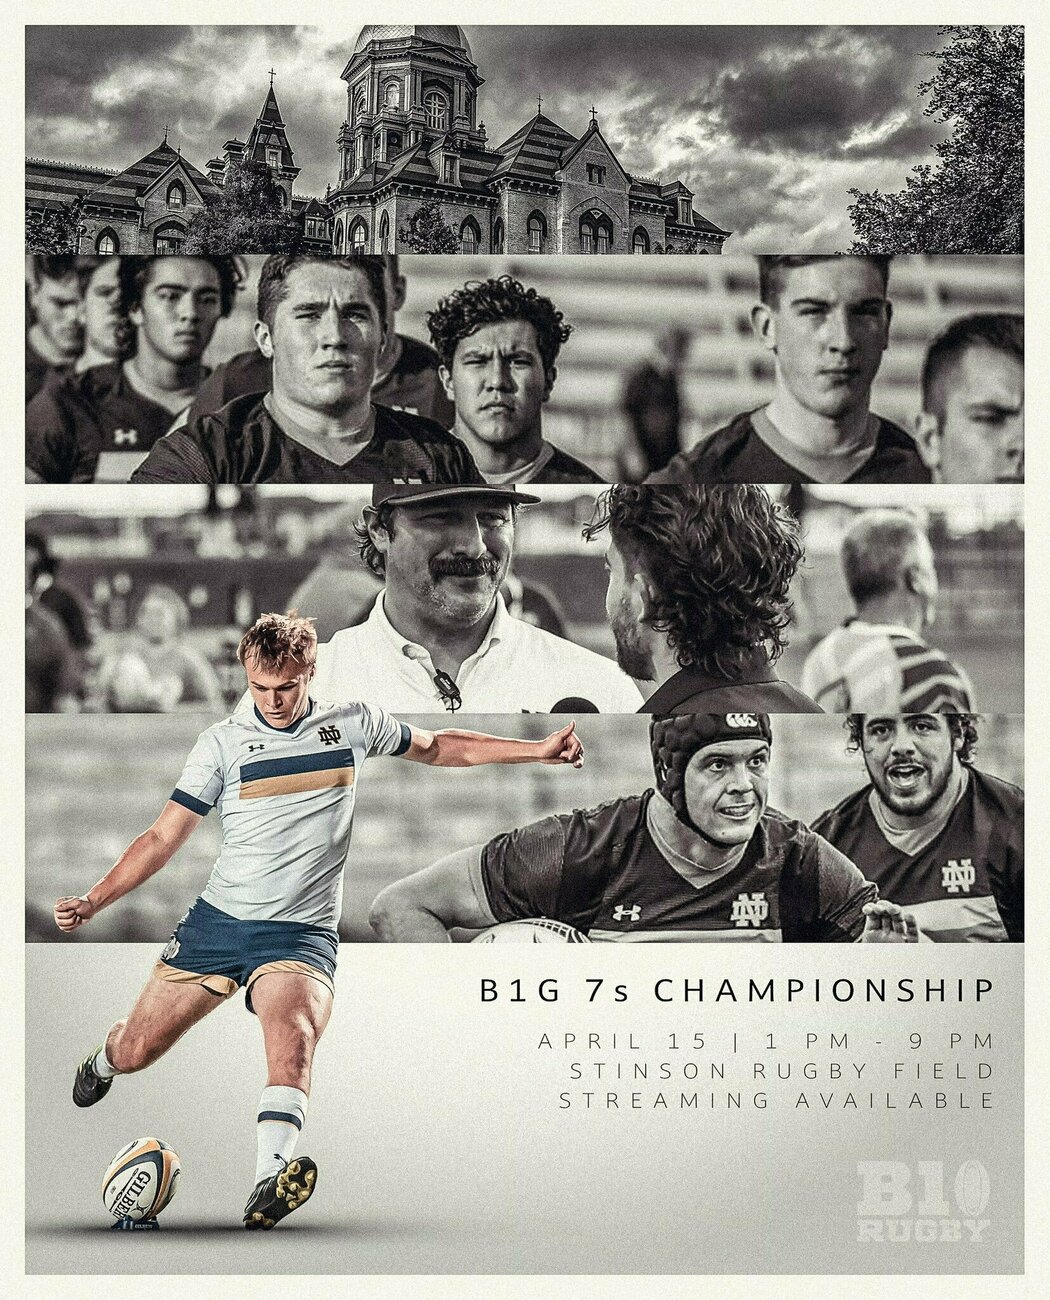 Big Ten Rugby Conference 7s Championship Events Rugby University of Notre Dame